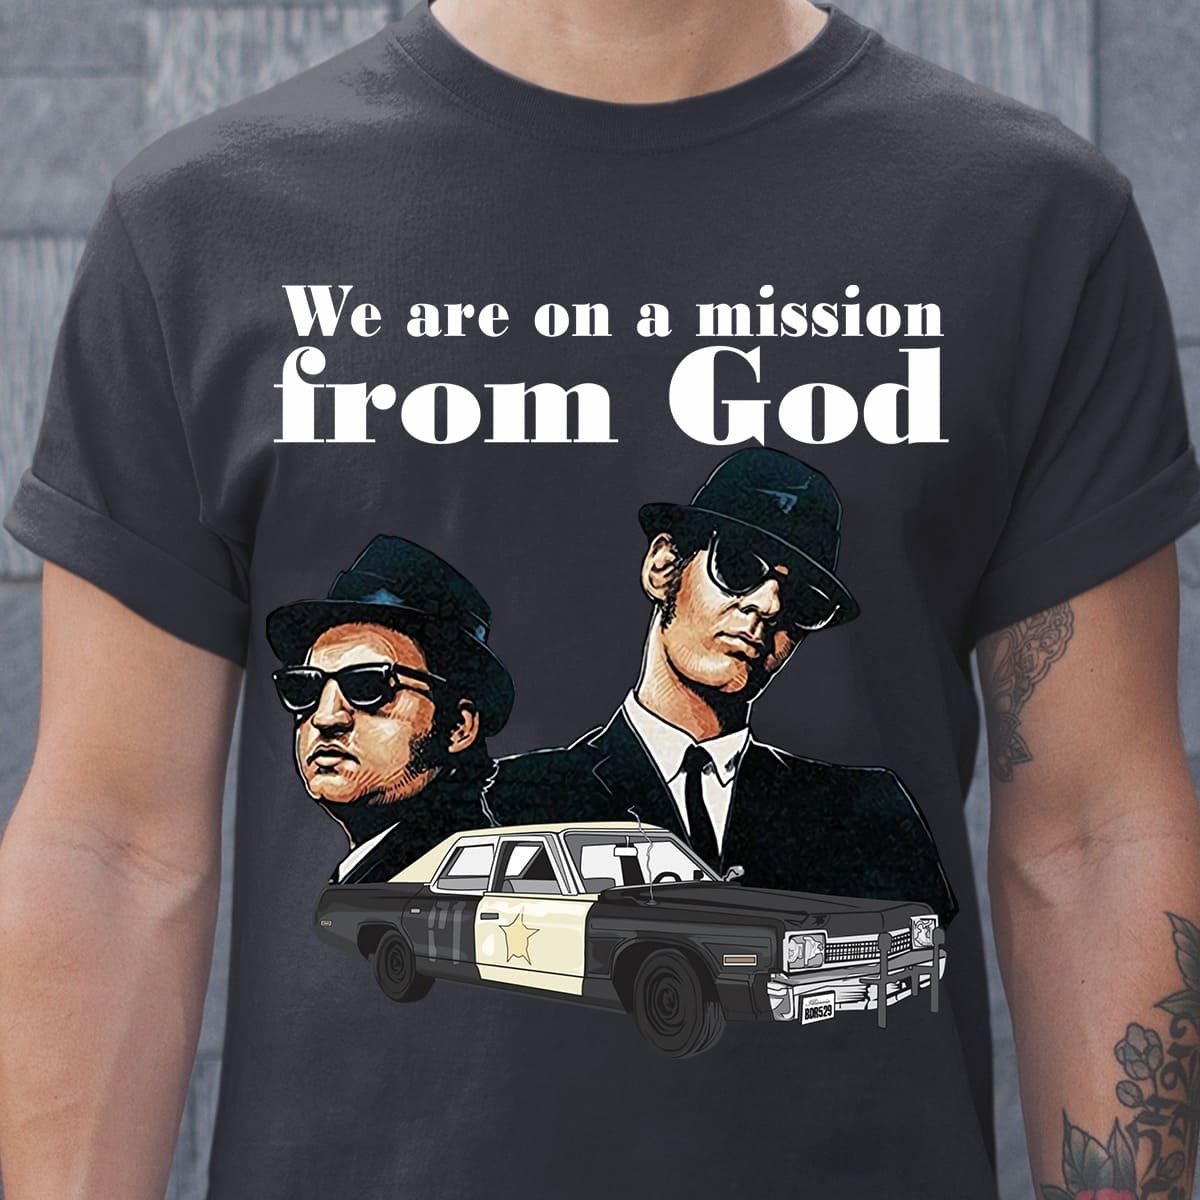 We are on a mission from God - Police vehicle graphic T-shirt, gift for police